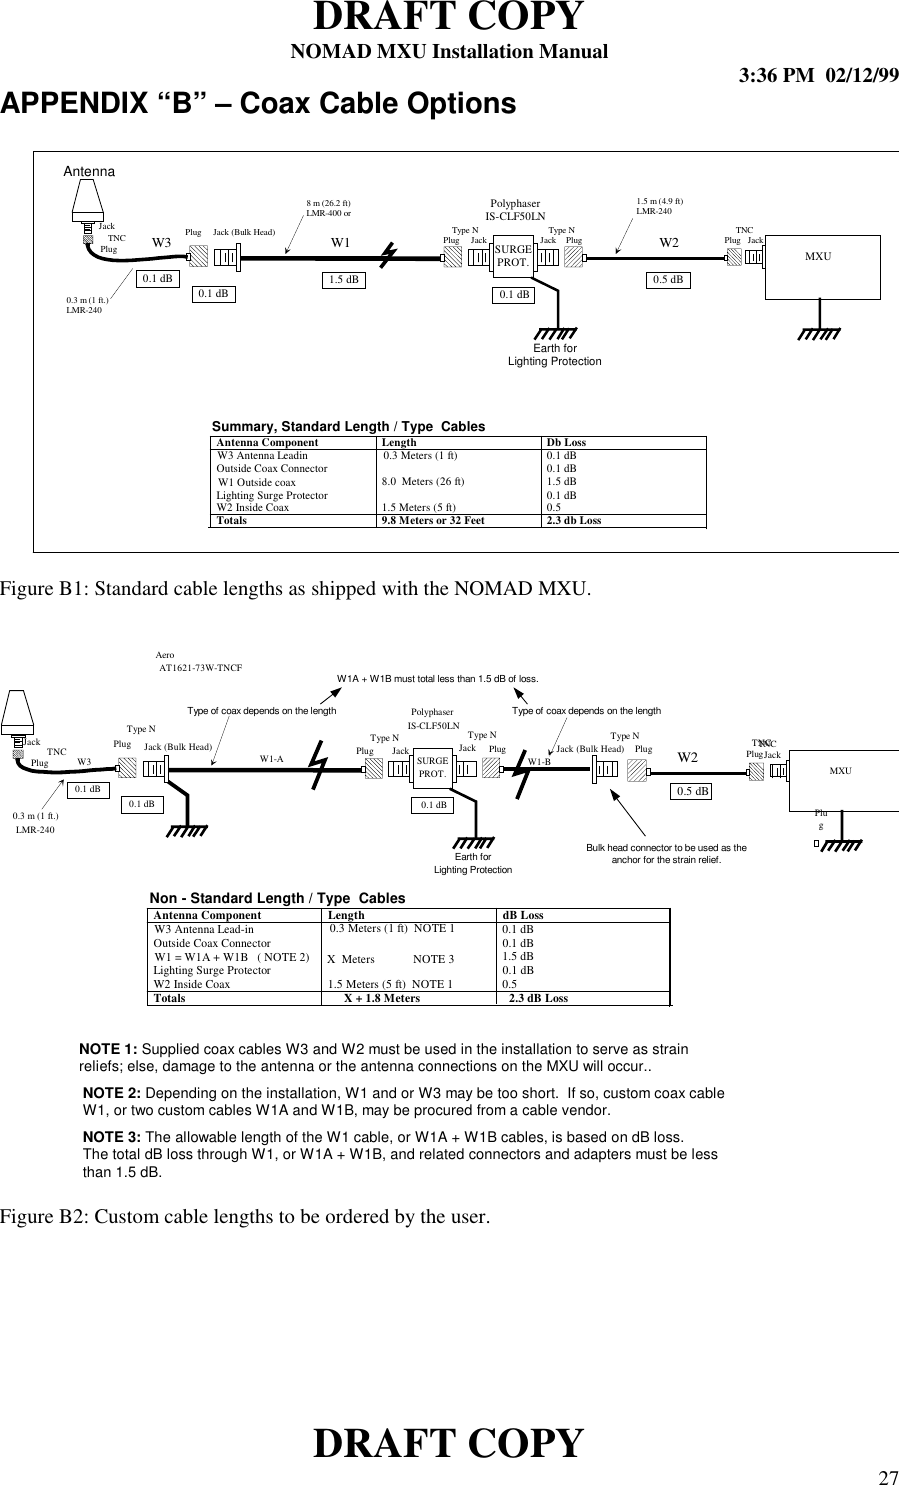 DRAFT COPYNOMAD MXU Installation Manual 3:36 PM  02/12/99DRAFT COPY 27APPENDIX “B” – Coax Cable OptionsFigure B1: Standard cable lengths as shipped with the NOMAD MXU.Figure B2: Custom cable lengths to be ordered by the user.MXUW1-A0.1 dBSURGEPROT.PlugAero AT1621-73W-TNCFPolyphaserIS-CLF50LNJackJack0.1 dBType N Type NJackPlug Jack (Bulk Head)Type N0.3 m (1 ft.)LMR-240TNC0.1 dBW3Earth forLighting ProtectionPlugTNCW20.5 dBPlug TNCPlugW1-BAntenna Component Length dB LossW3 Antenna Lead-in 0.3 Meters (1 ft)  NOTE 1 0.1 dBOutside Coax Connector 0.1 dBW1 = W1A + W1B   ( NOTE 2) X  Meters             NOTE 3 1.5 dBLighting Surge Protector 0.1 dBW2 Inside Coax 1.5 Meters (5 ft)  NOTE 1 0.5Totals X + 1.8 Meters 2.3 dB LossNon - Standard Length / Type  CablesNOTE 3: The allowable length of the W1 cable, or W1A + W1B cables, is based on dB loss.The total dB loss through W1, or W1A + W1B, and related connectors and adapters must be lessthan 1.5 dB.NOTE 1: Supplied coax cables W3 and W2 must be used in the installation to serve as strainreliefs; else, damage to the antenna or the antenna connections on the MXU will occur..NOTE 2: Depending on the installation, W1 and or W3 may be too short.  If so, custom coax cableW1, or two custom cables W1A and W1B, may be procured from a cable vendor.Type of coax depends on the length Type of coax depends on the lengthPlugJack (Bulk Head)Type NBulk head connector to be used as theanchor for the strain relief.W1A + W1B must total less than 1.5 dB of loss.PlugJackAntenna Component Length Db LossW3 Antenna Leadin 0.3 Meters (1 ft) 0.1 dBOutside Coax Connector 0.1 dBW1 Outside coax 8.0  Meters (26 ft) 1.5 dBLighting Surge Protector 0.1 dBW2 Inside Coax 1.5 Meters (5 ft) 0.5Totals 9.8 Meters or 32 Feet 2.3 db LossSummary, Standard Length / Type  CablesMXUW1 W21.5 dB 0.5 dB0.1 dBSURGEPROT.PlugPolyphaserIS-CLF50LNJackJack0.1 dBPlugType N Type N TNCPlug JackPlug Jack (Bulk Head)8 m (26.2 ft)LMR-400 or1.5 m (4.9 ft)LMR-2400.3 m (1 ft.)LMR-240TNC0.1 dBW3Earth forLighting ProtectionPlugJackAntenna